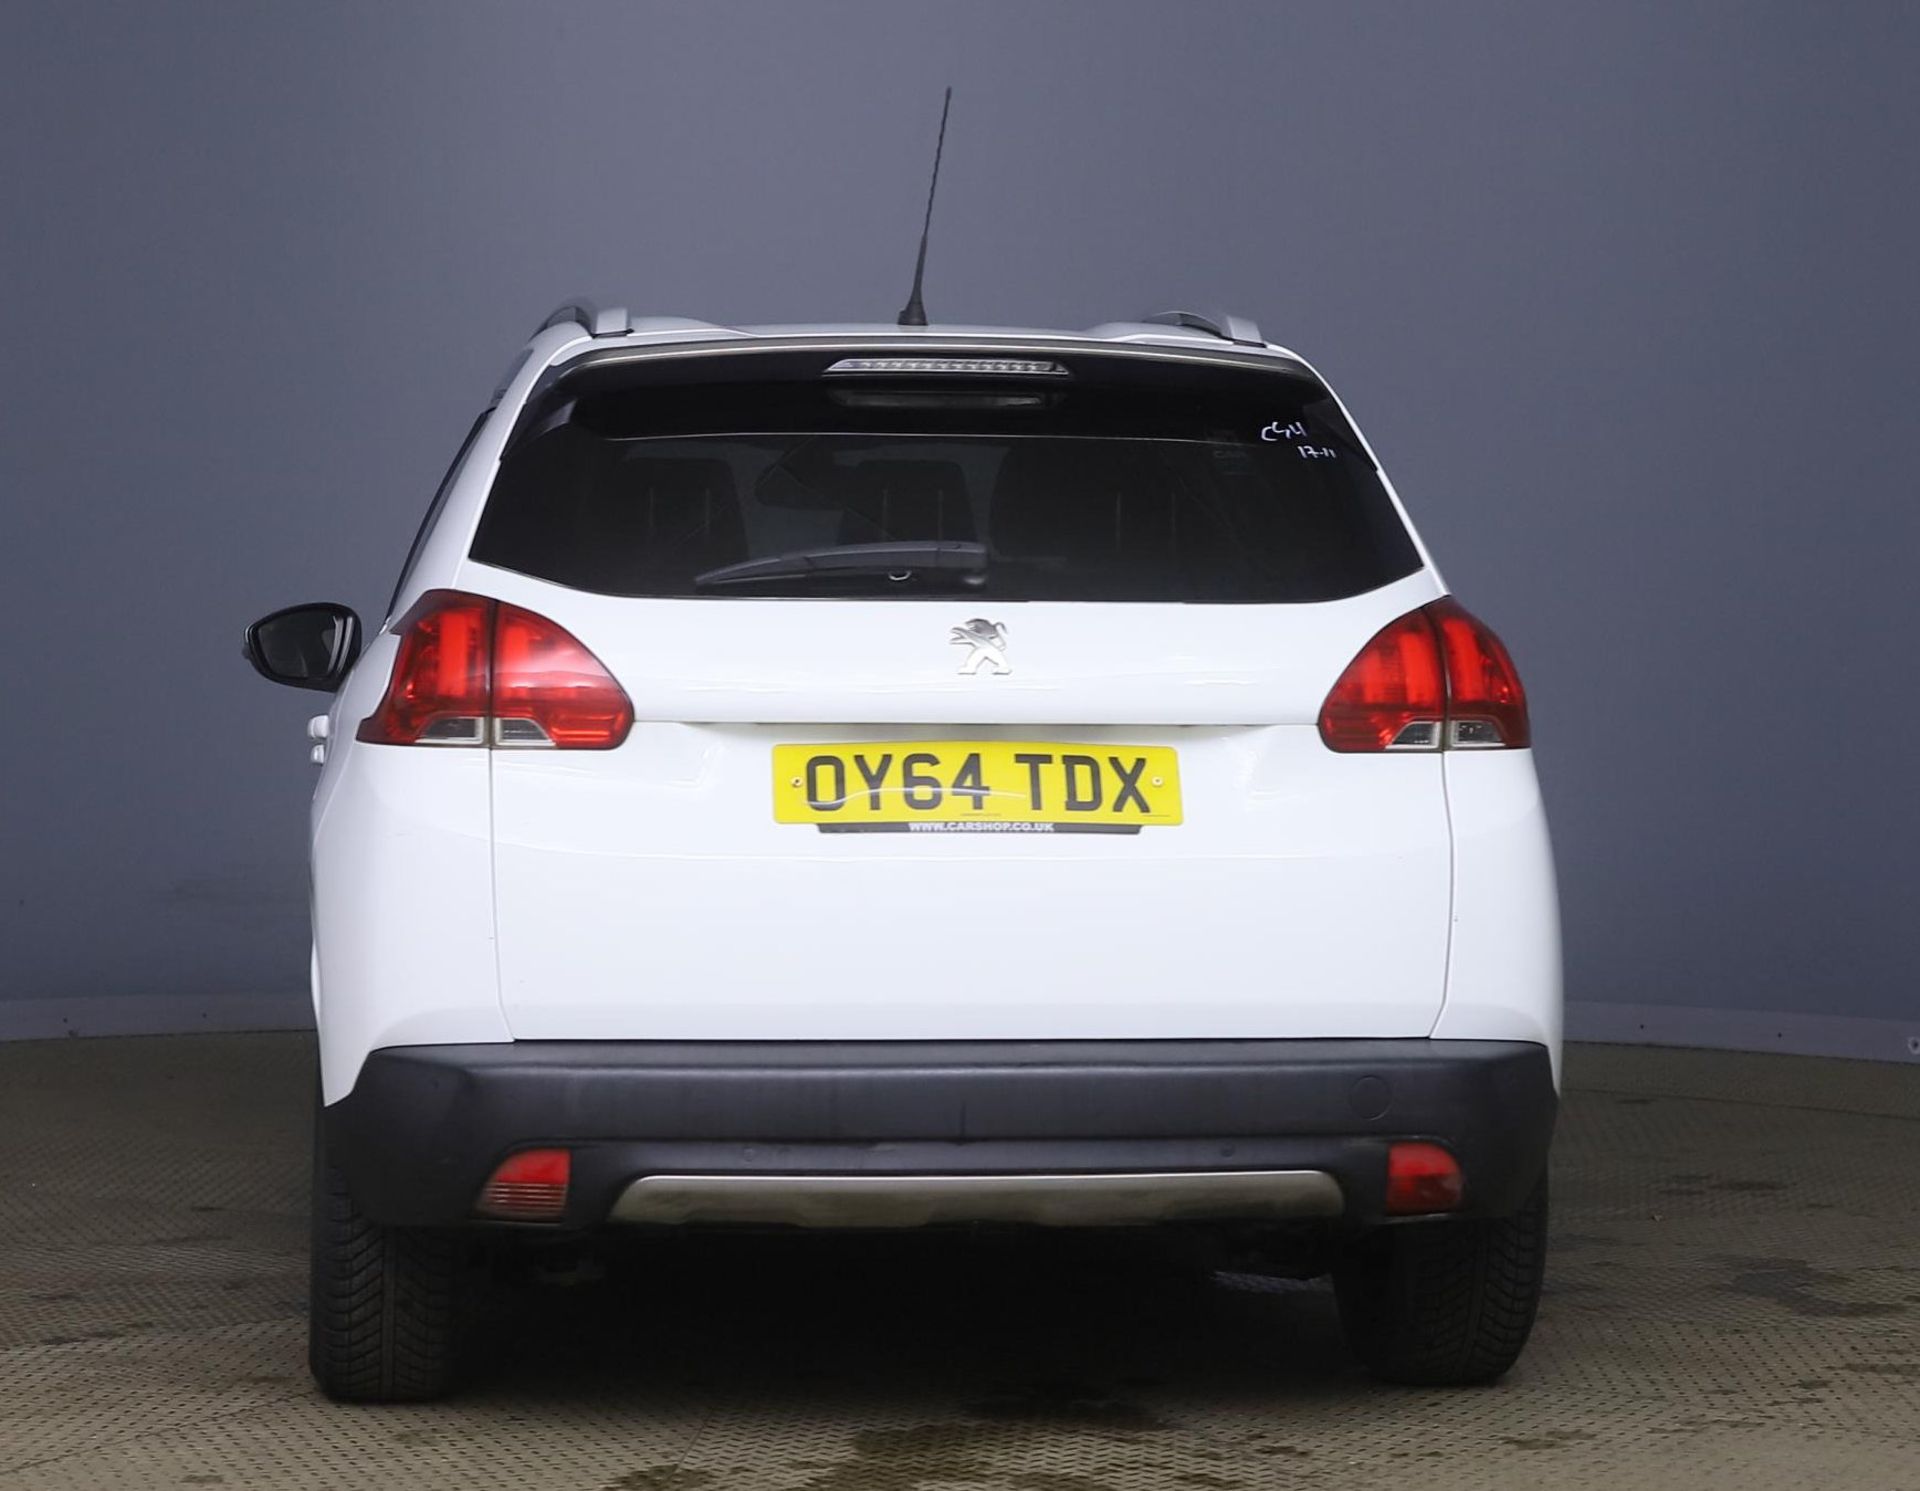 2014 Peugeot 2008 1.2 Crossway 5 Door MPV - FSH - CL505 - NO VAT ON THE HAMMER - Location: Corby, No - Image 6 of 12